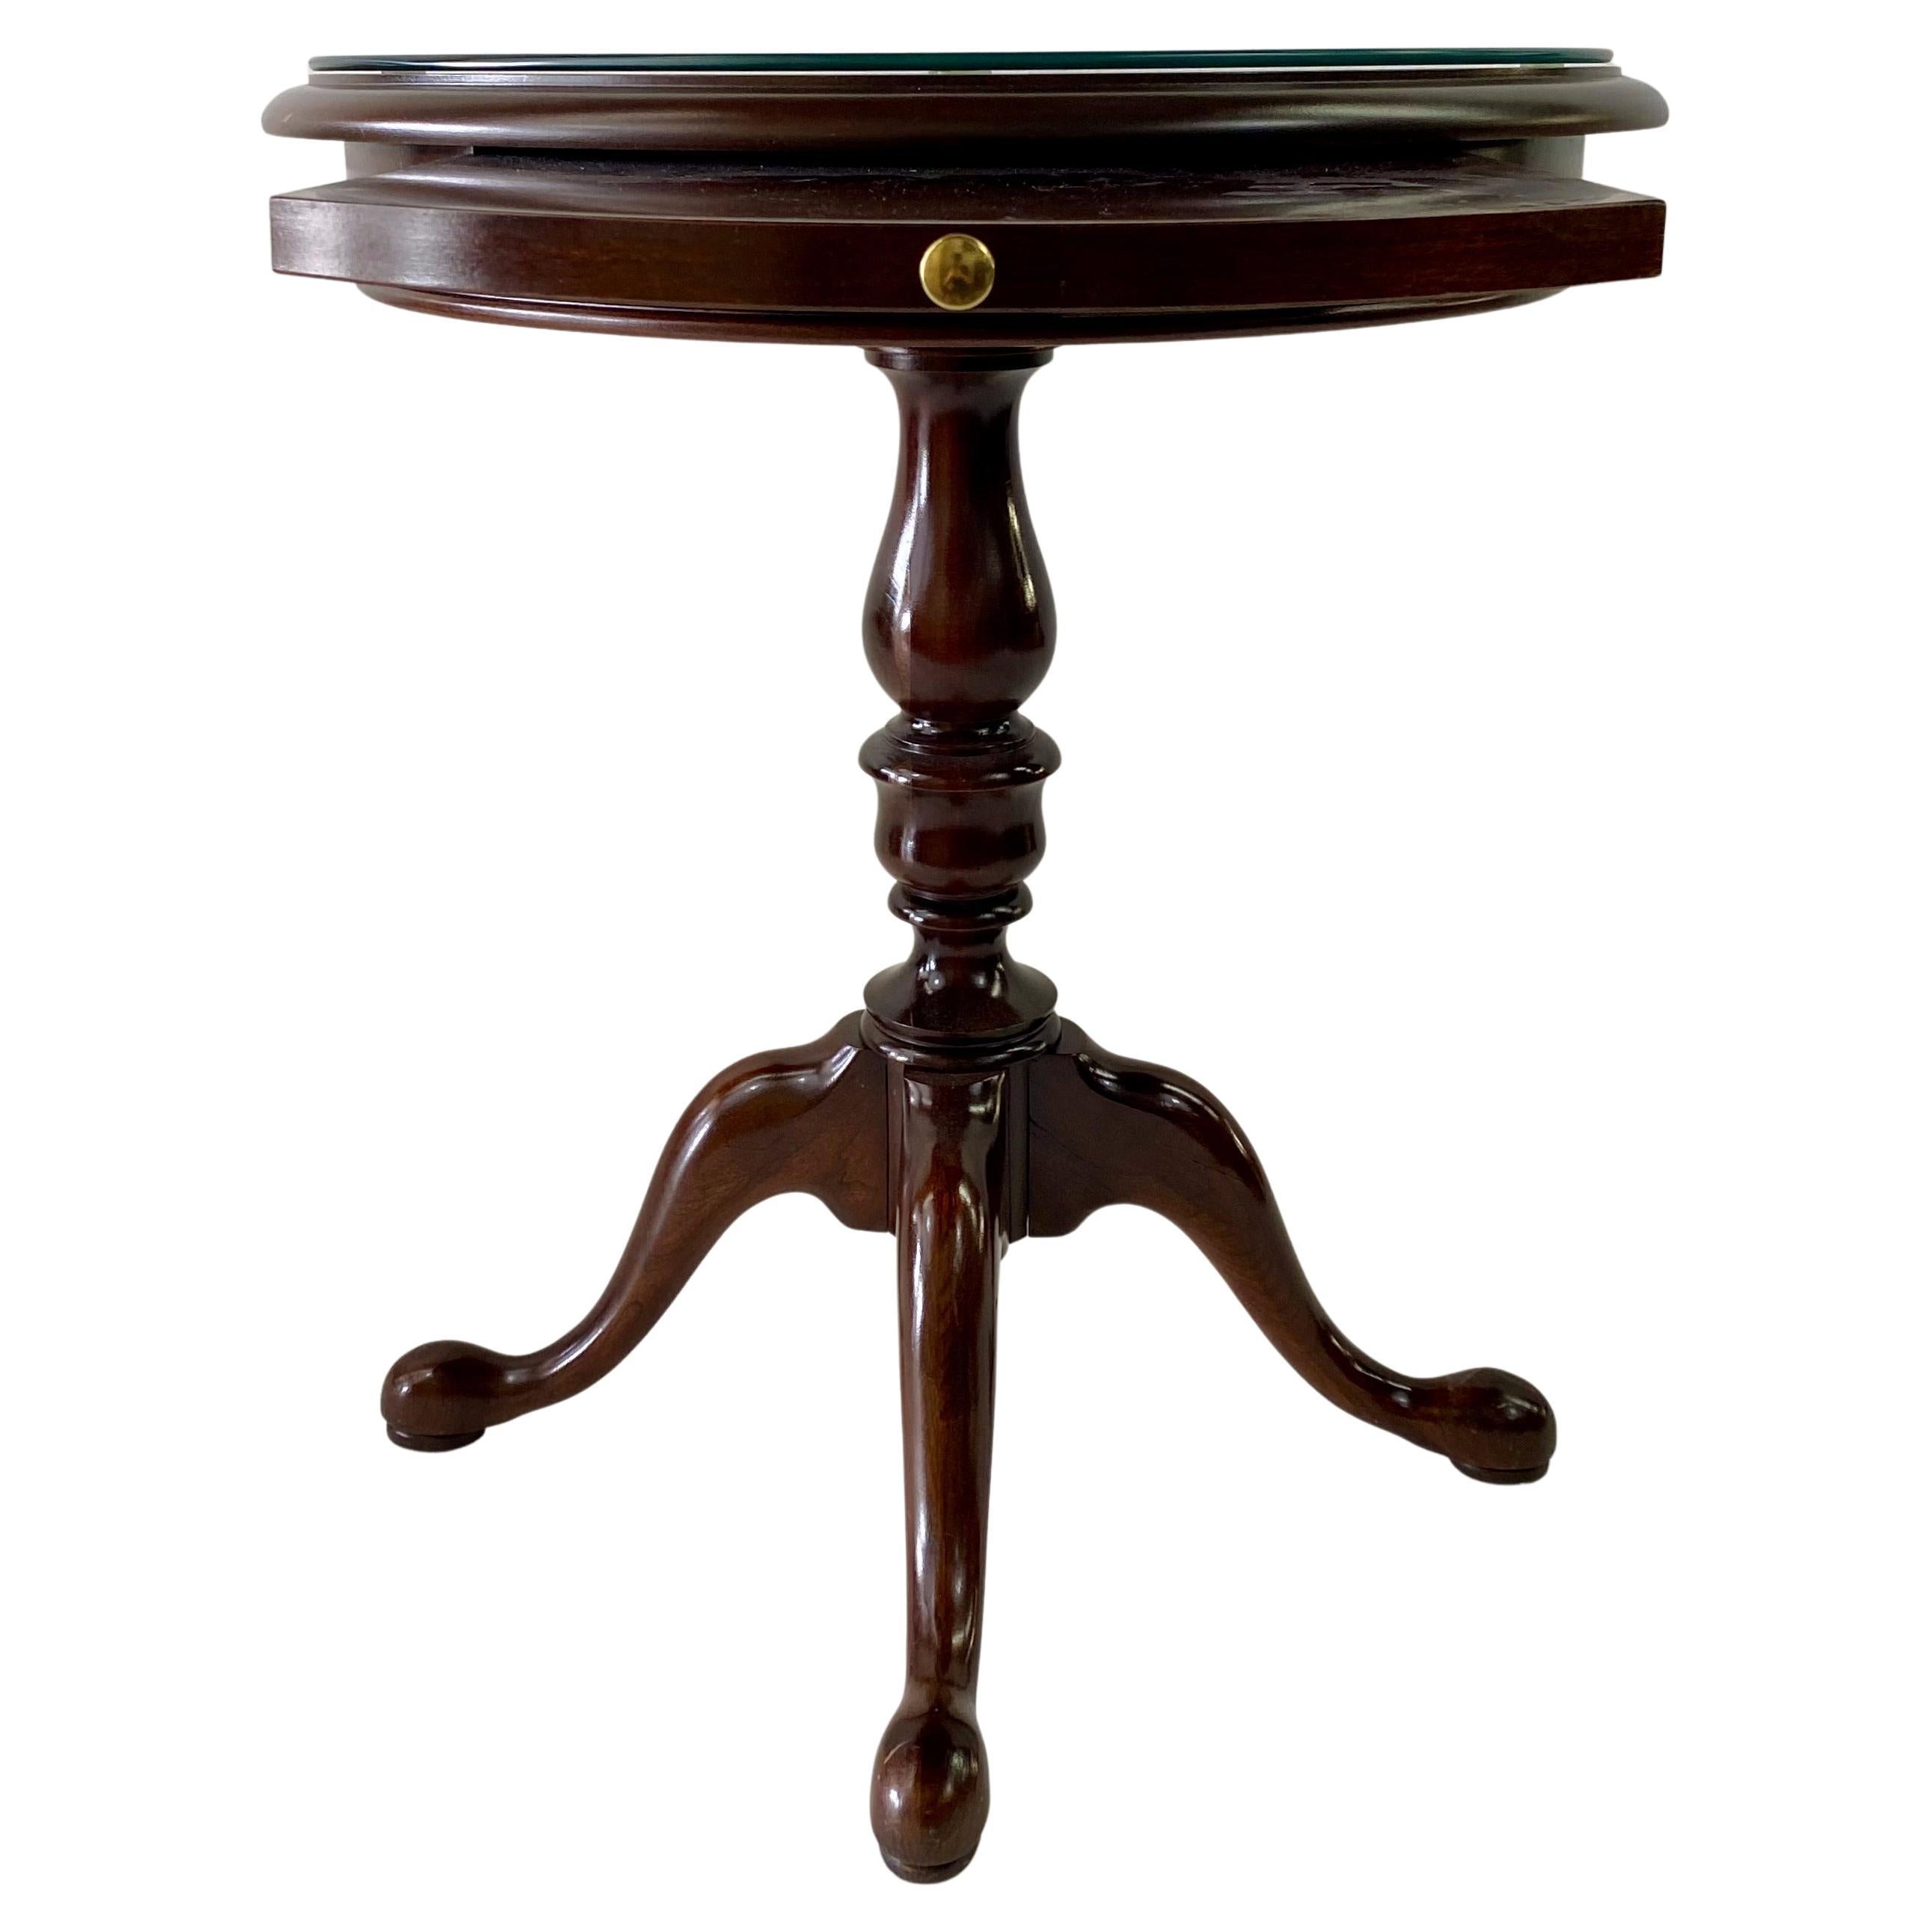 A quality and classy gueridon table made of fine Mahogany wood. The side or end table oval shaped top features beautiful natural wood grain and is equipped with a pull extension tray offering more space to place additional items. The base and the